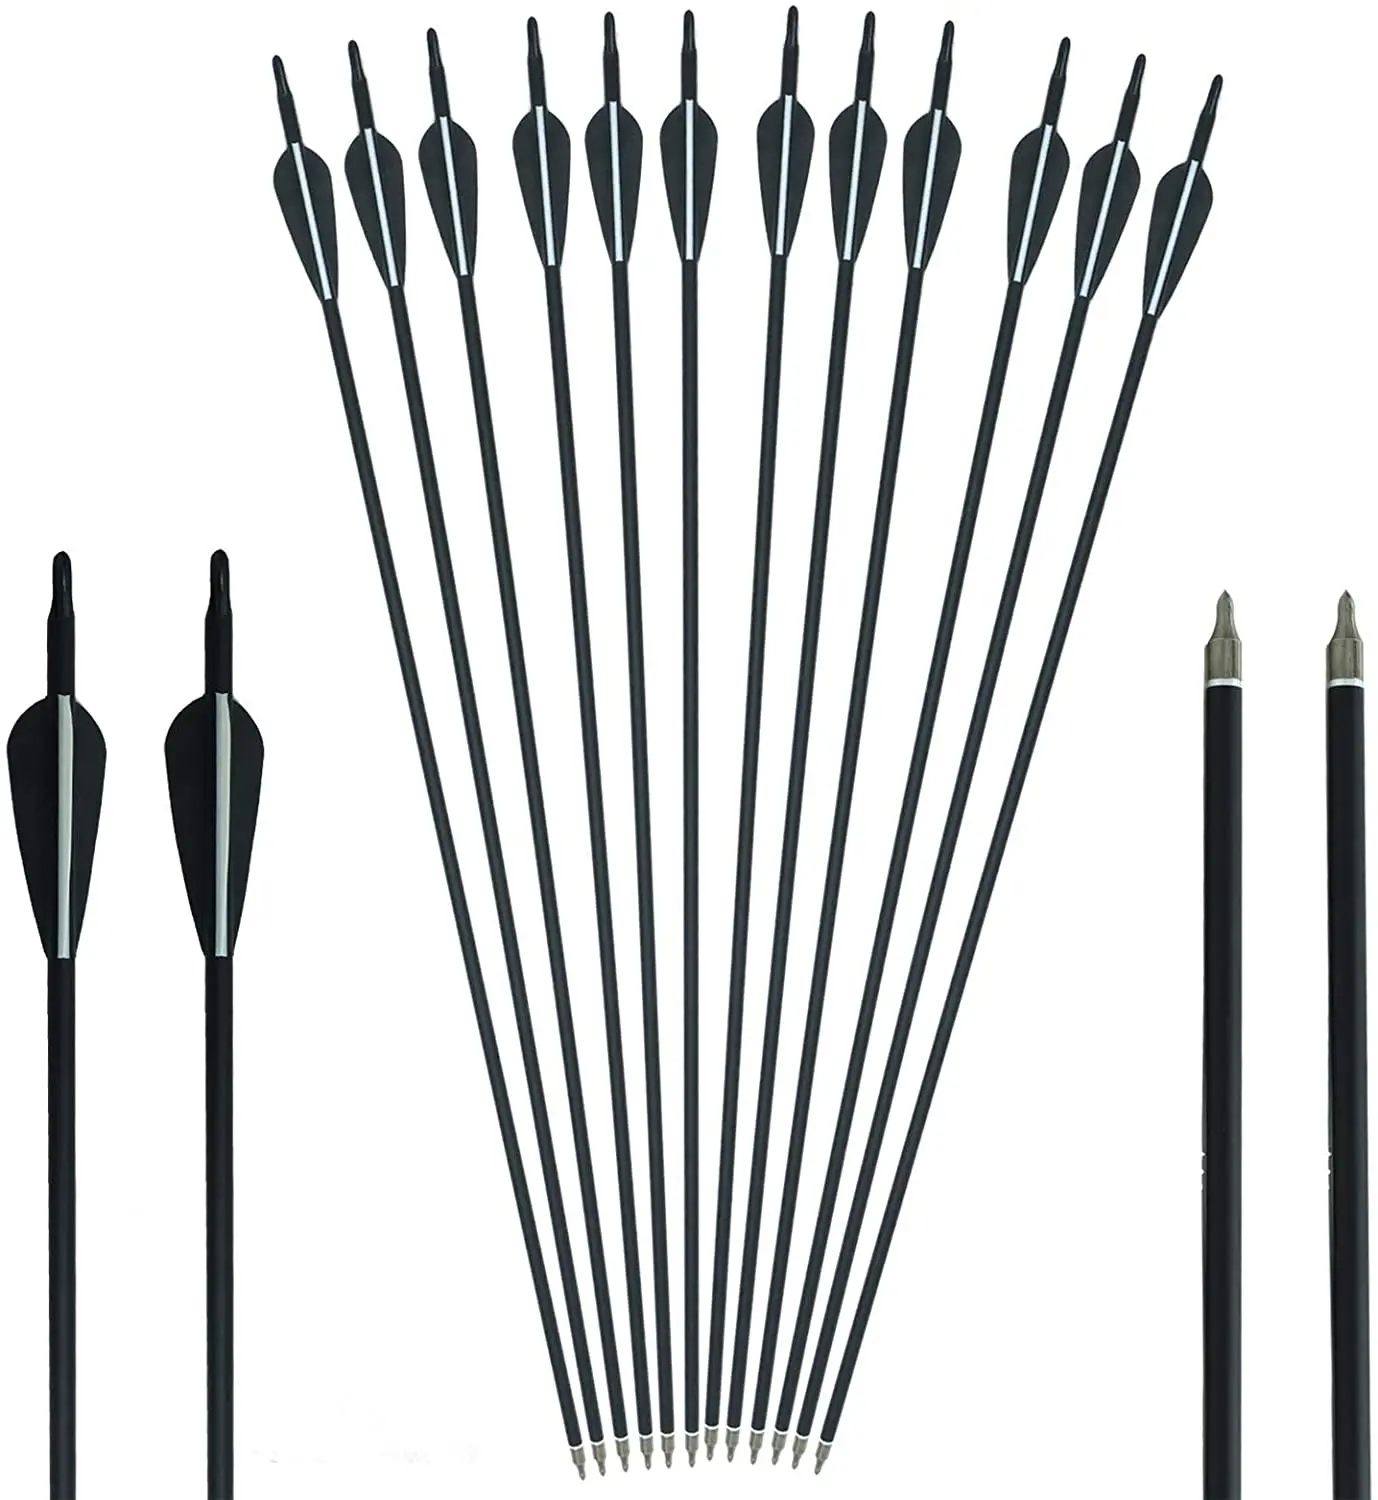 

Replaceable Tips Target Arrow bow and arrows for sale Recurve compound Bow 7.8 mm Axis Hybrid Archery Hunting Mixed Carbon Arrow, Black and white